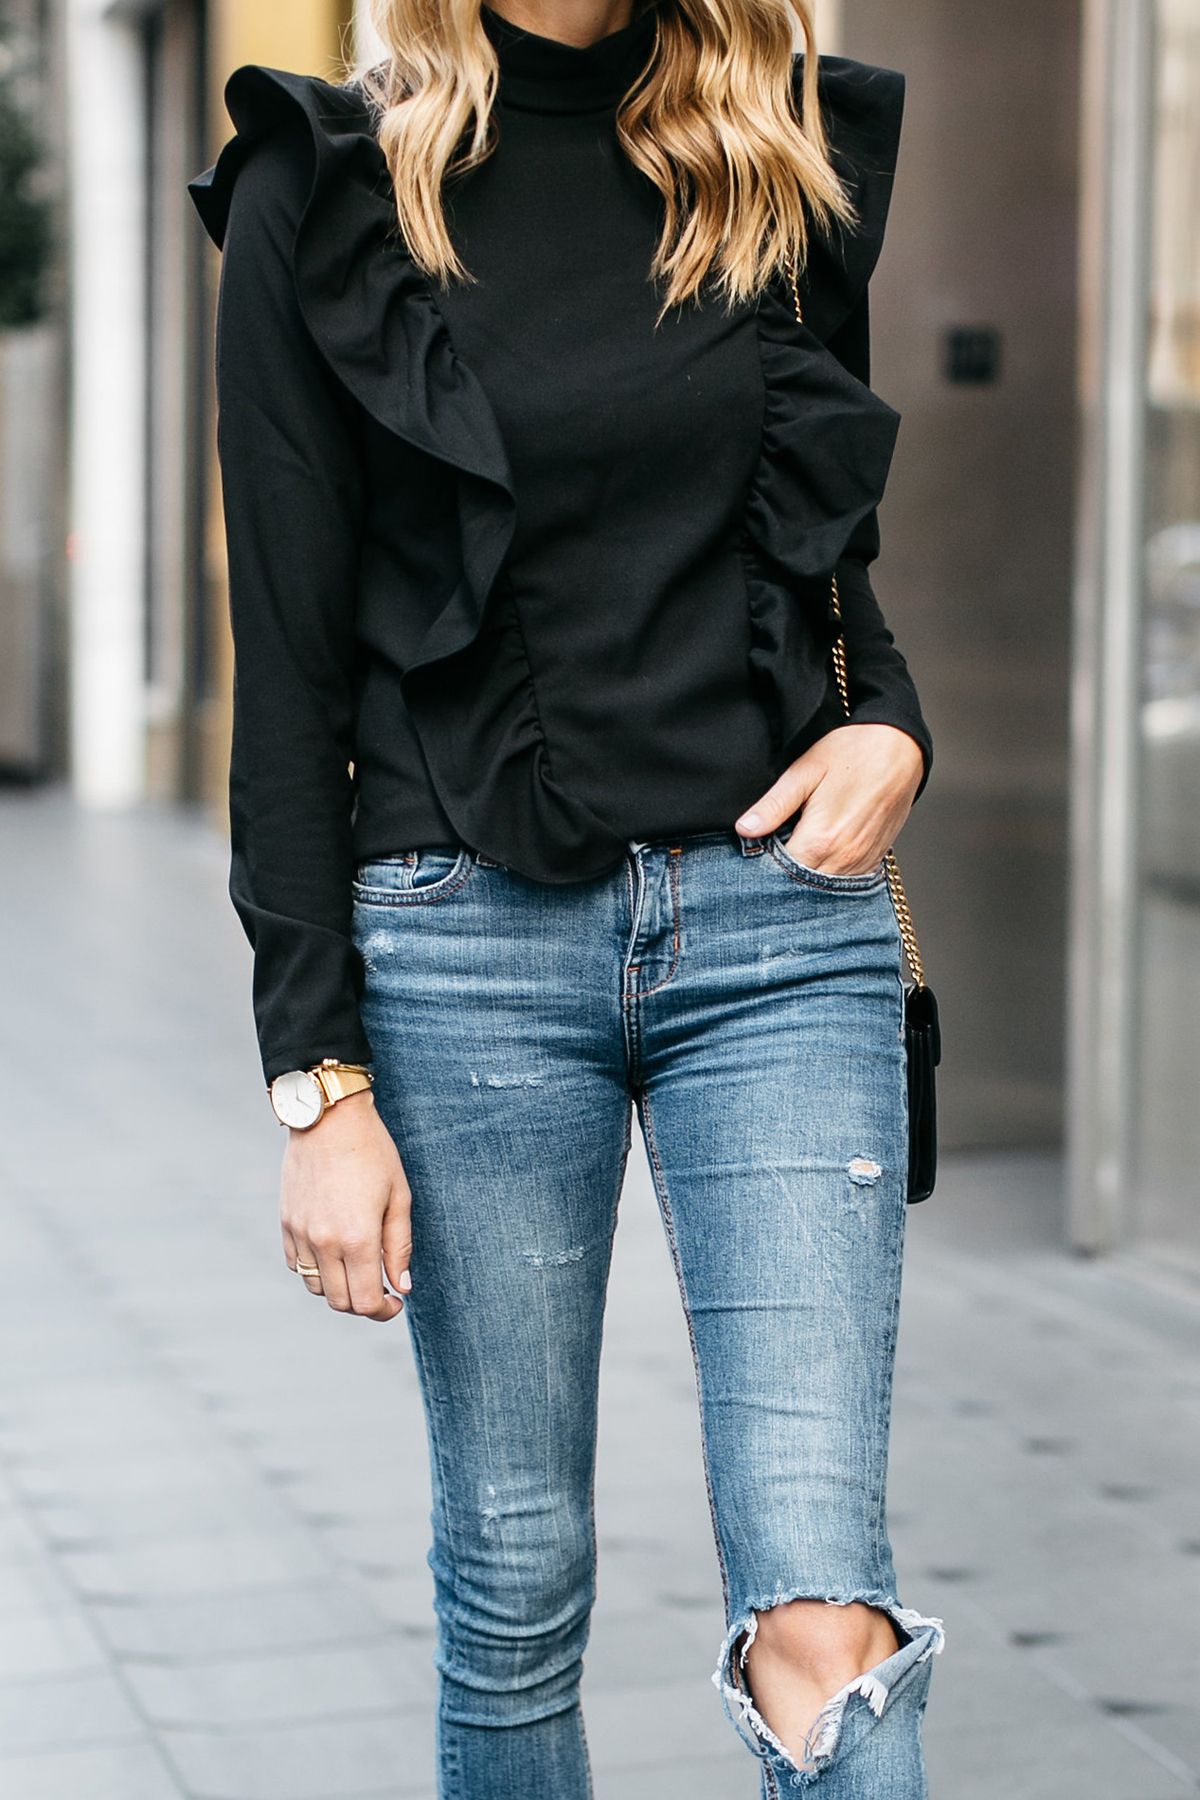 How To Style Black Ruffle Top